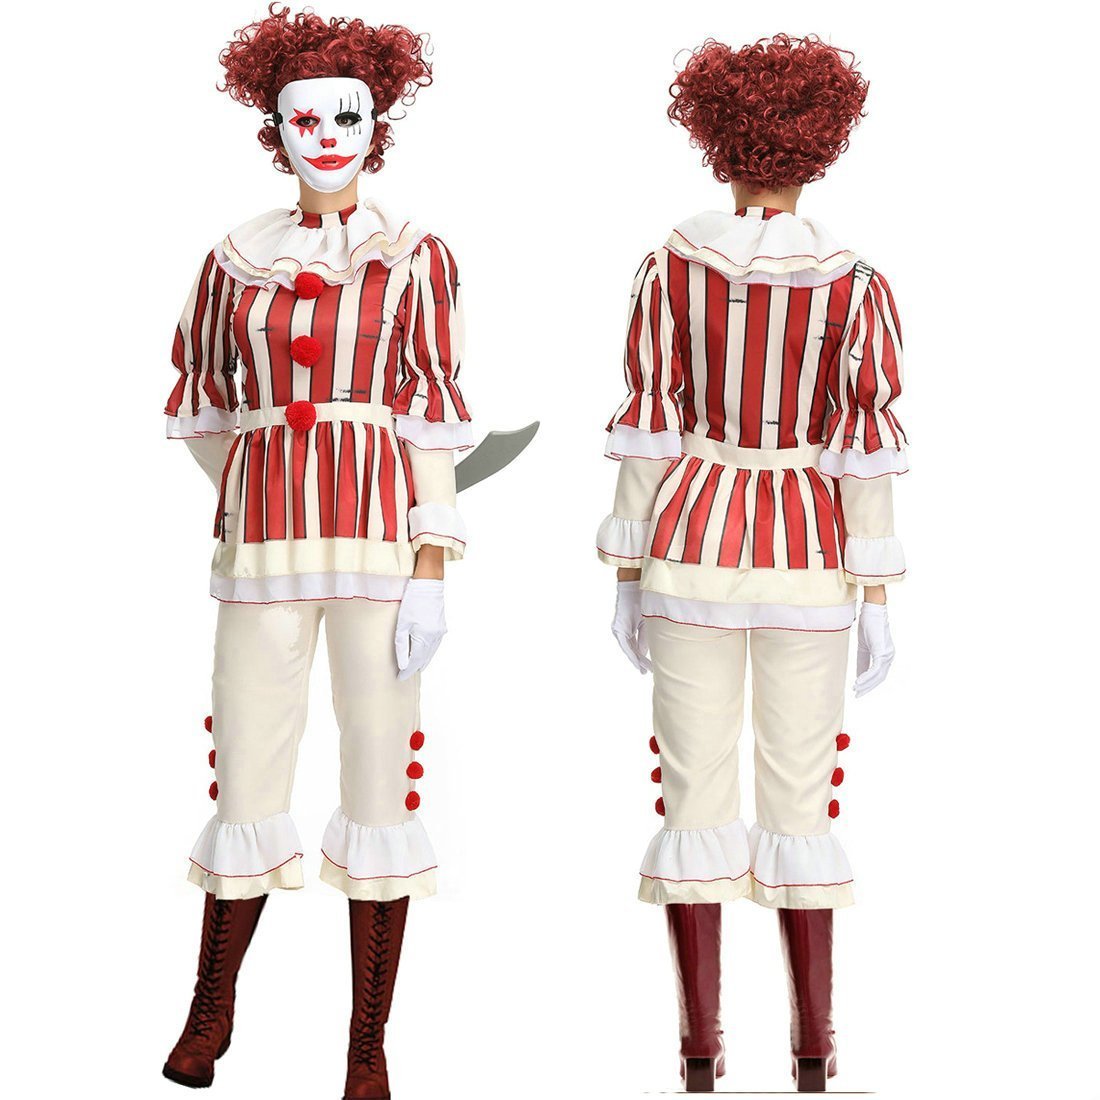 Halloween Party Outfits Terror Evil Clown Cosplay Costume for Adult